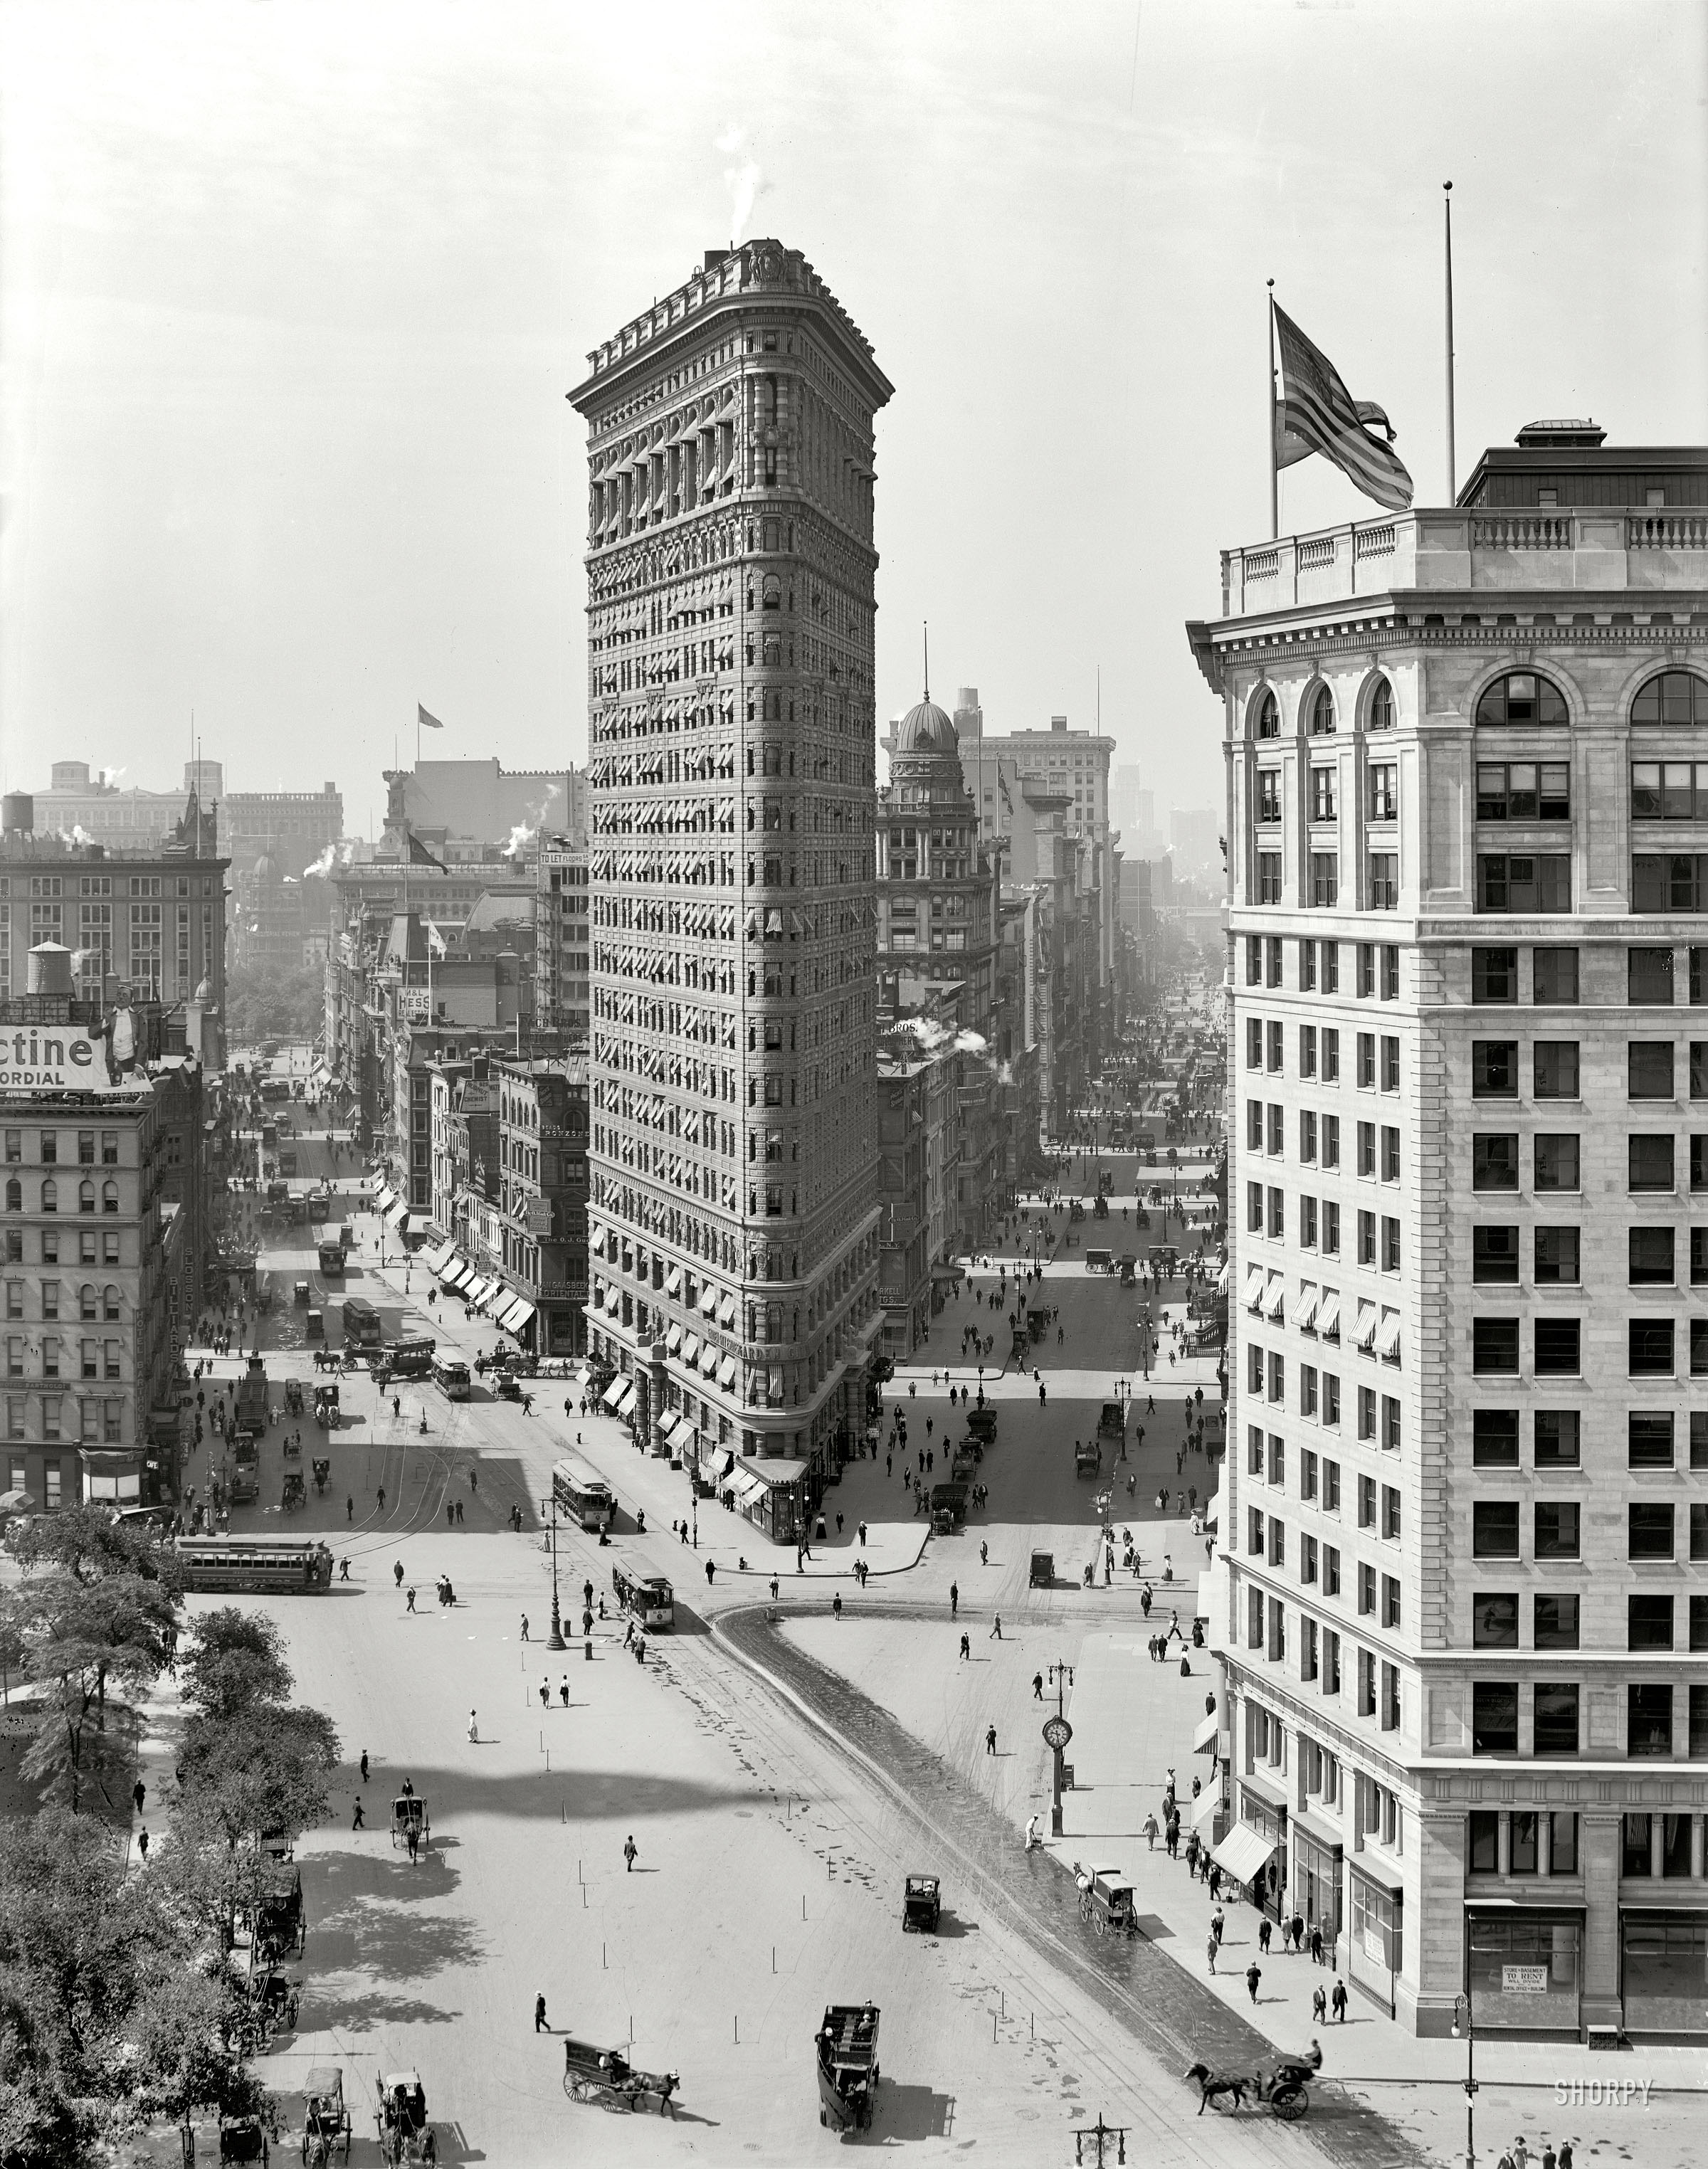 August 1909. "The Flat Iron Building, New York." One of Detroit Publishing's favorite subjects, making its eighth appearance here. View full size.